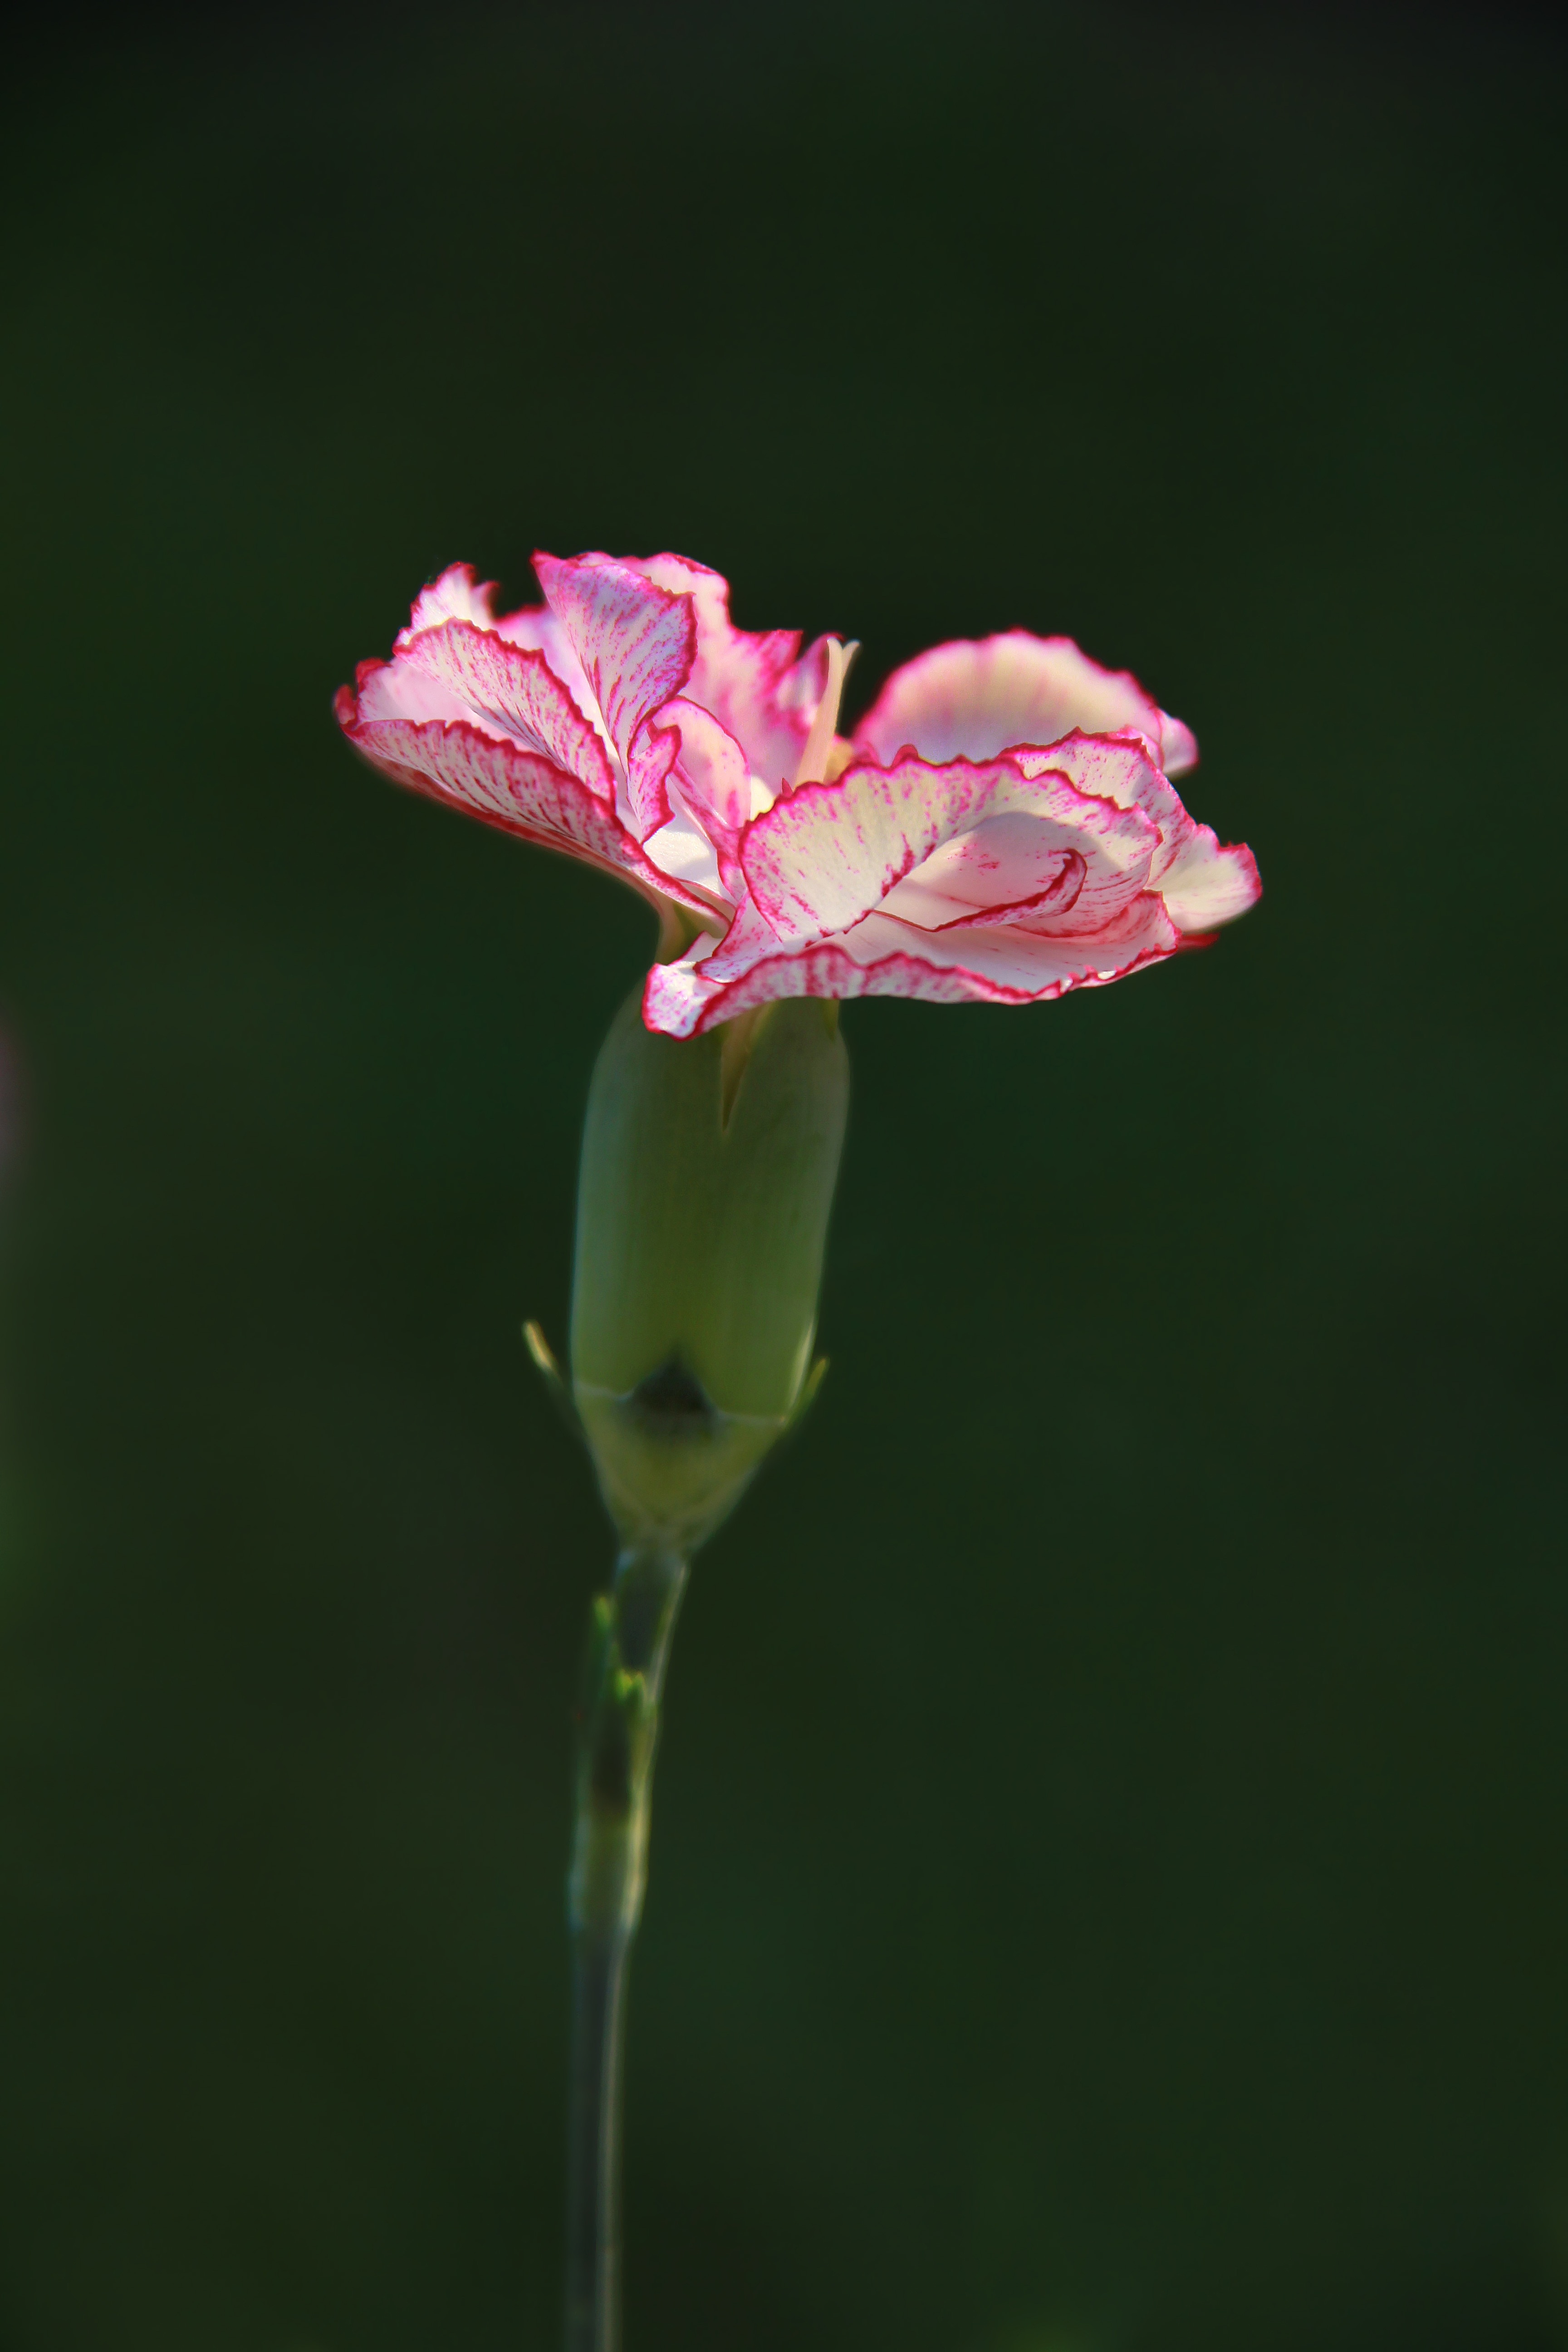 pink and white carnation flower in close up photography